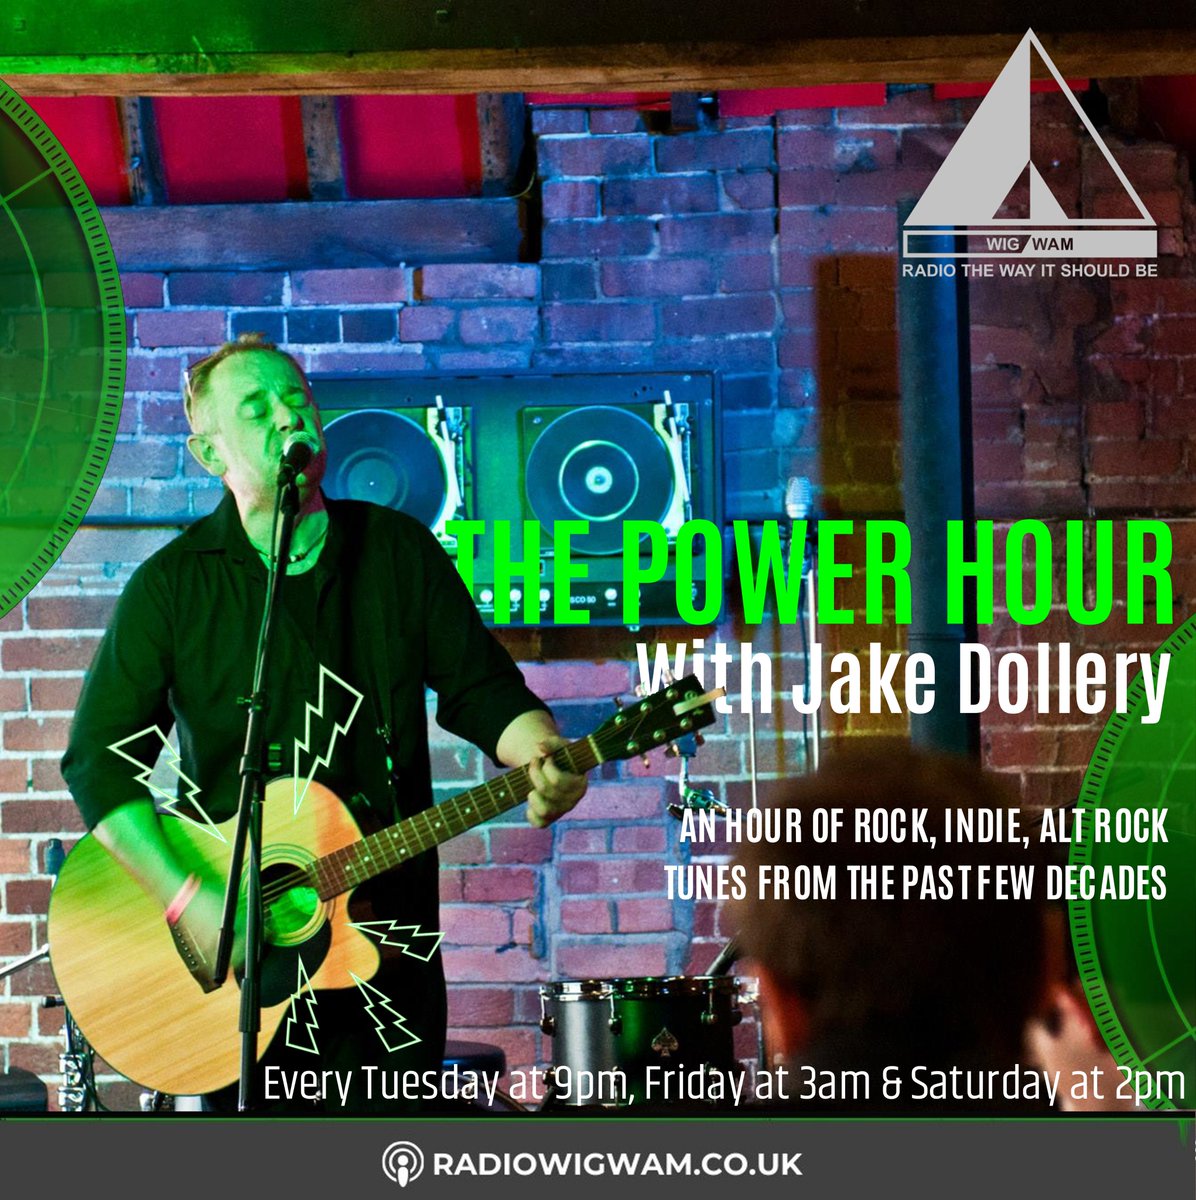 Tonight on Radio Wigwam I bring you another brand new Power Hour at 9pm with the usual 70s throwback and the Unsigned Indie Double Shot features. radiowigwam.co.uk on your phone, smart speaker & in your car.